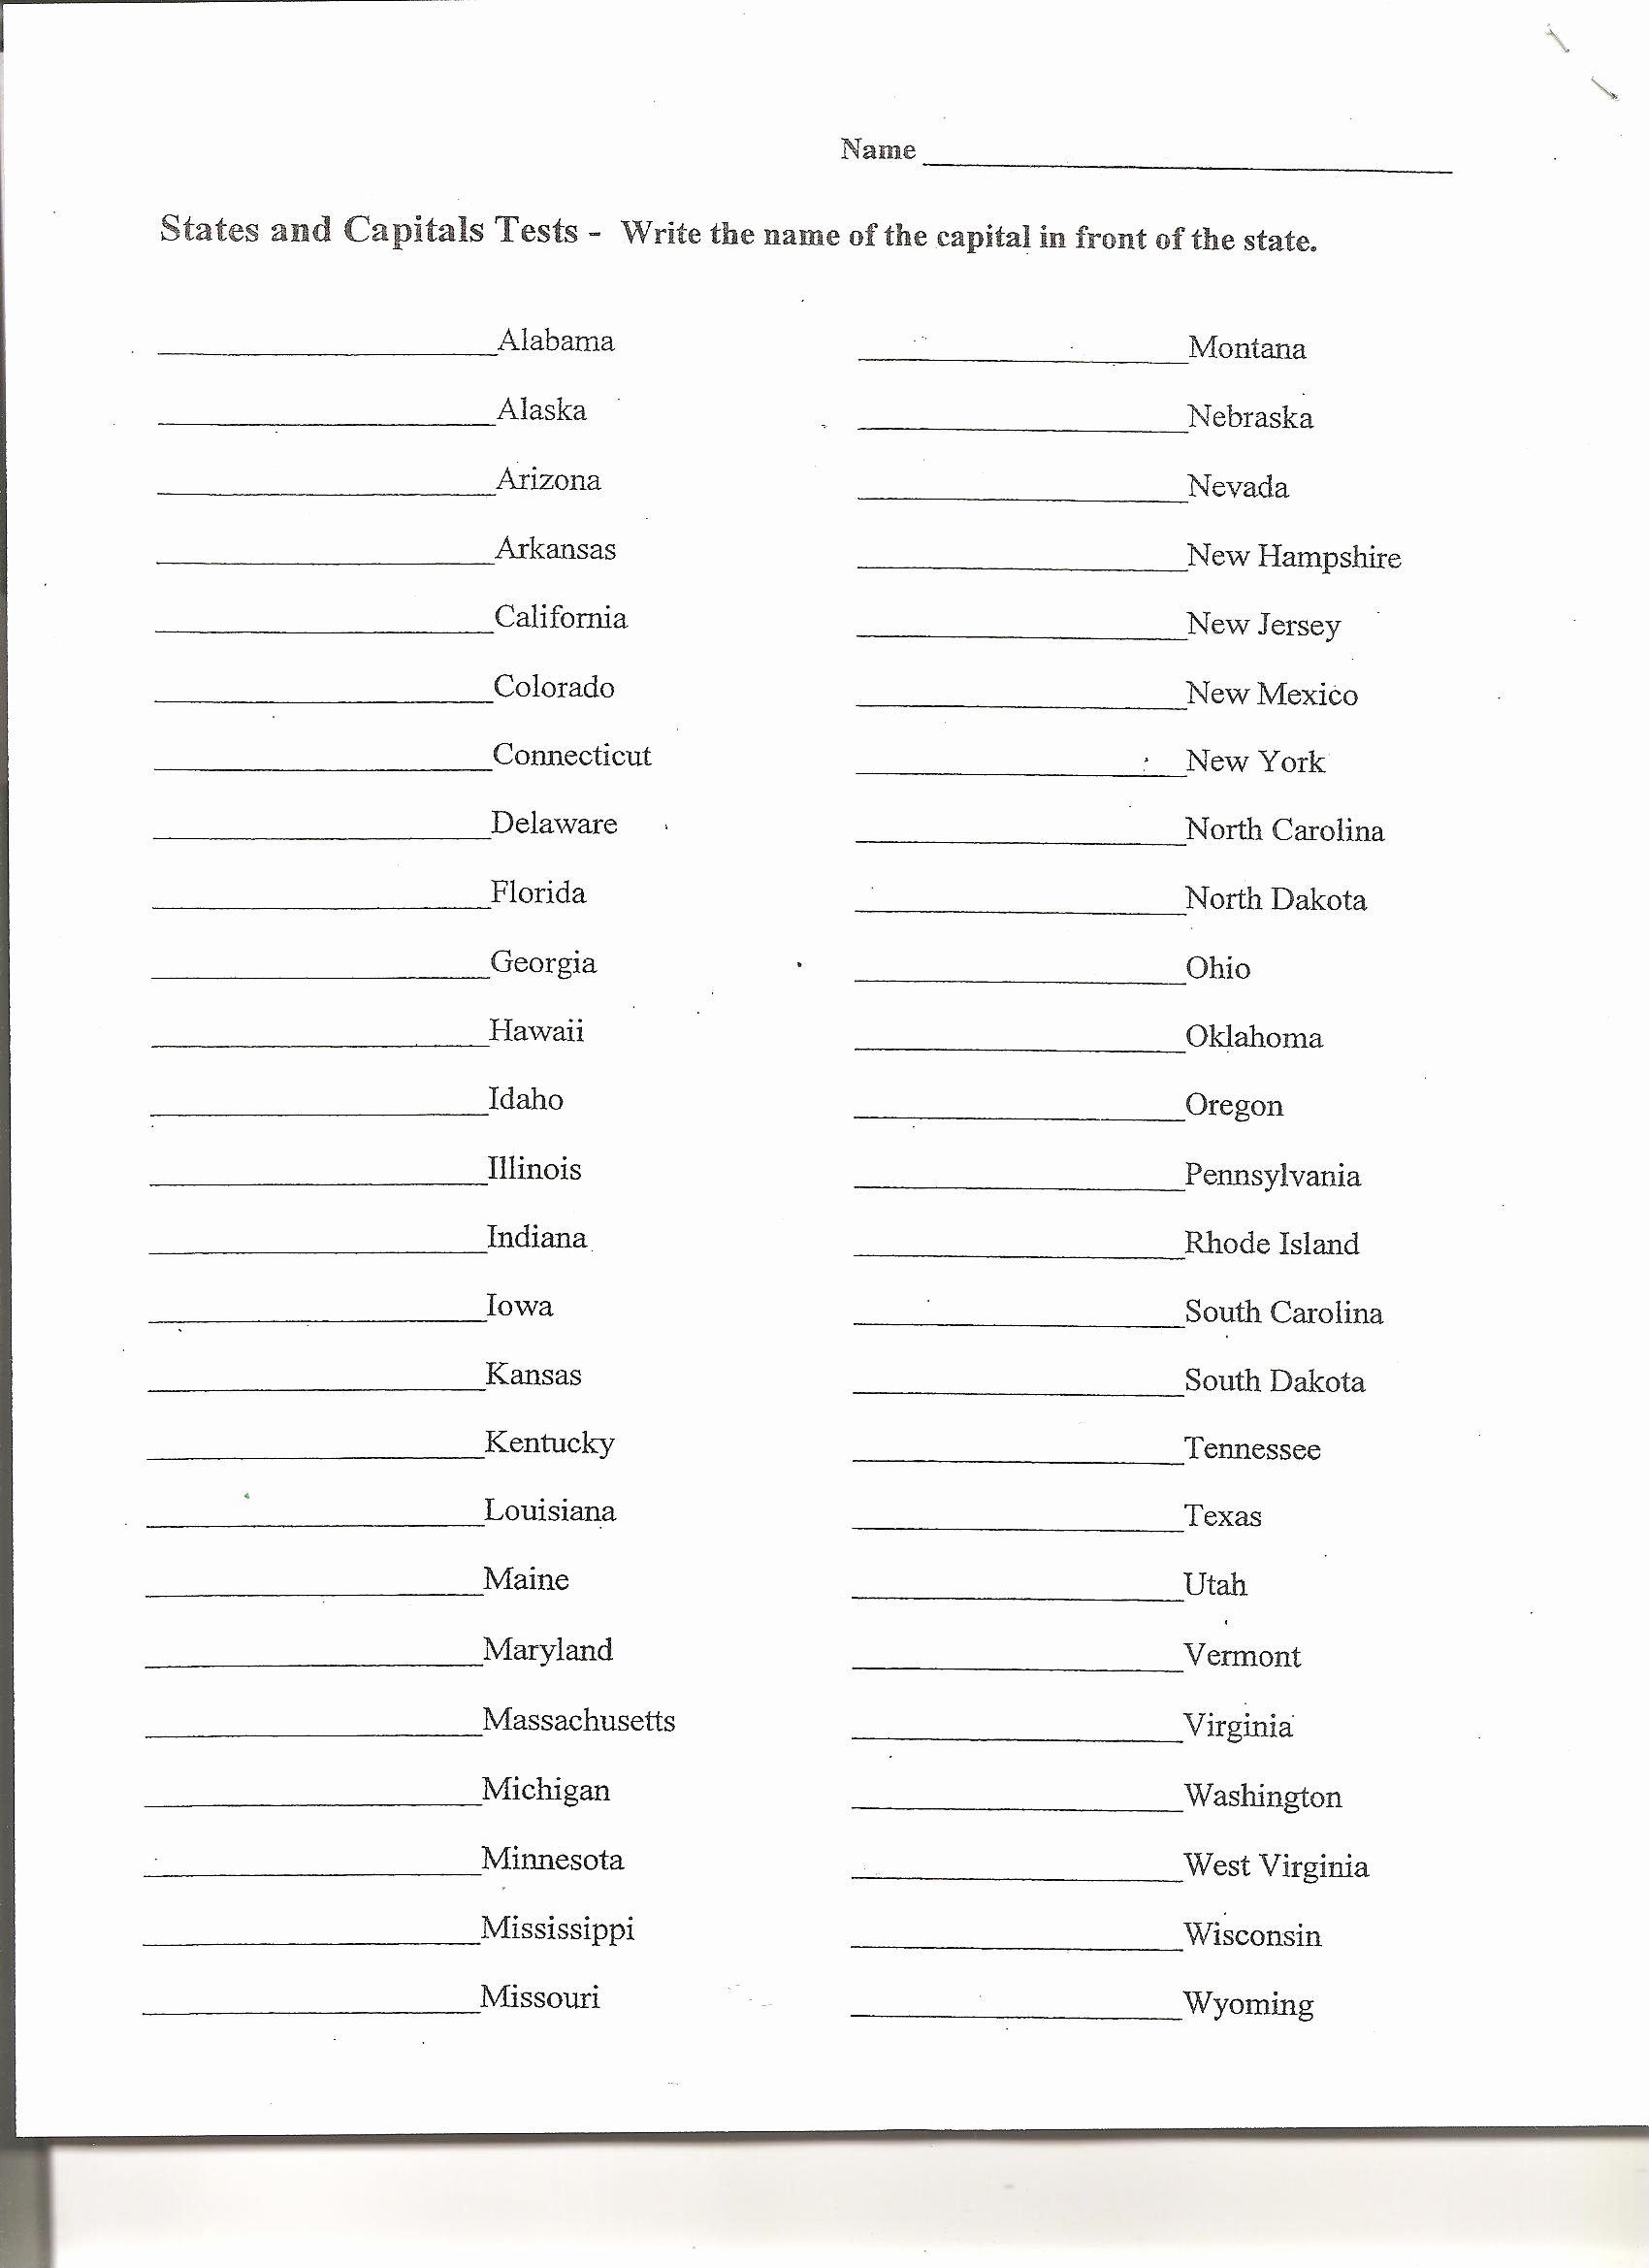 States and Capitals Matching Worksheet Lovely States and Capitals Quiz Worksheet the Best Worksheets